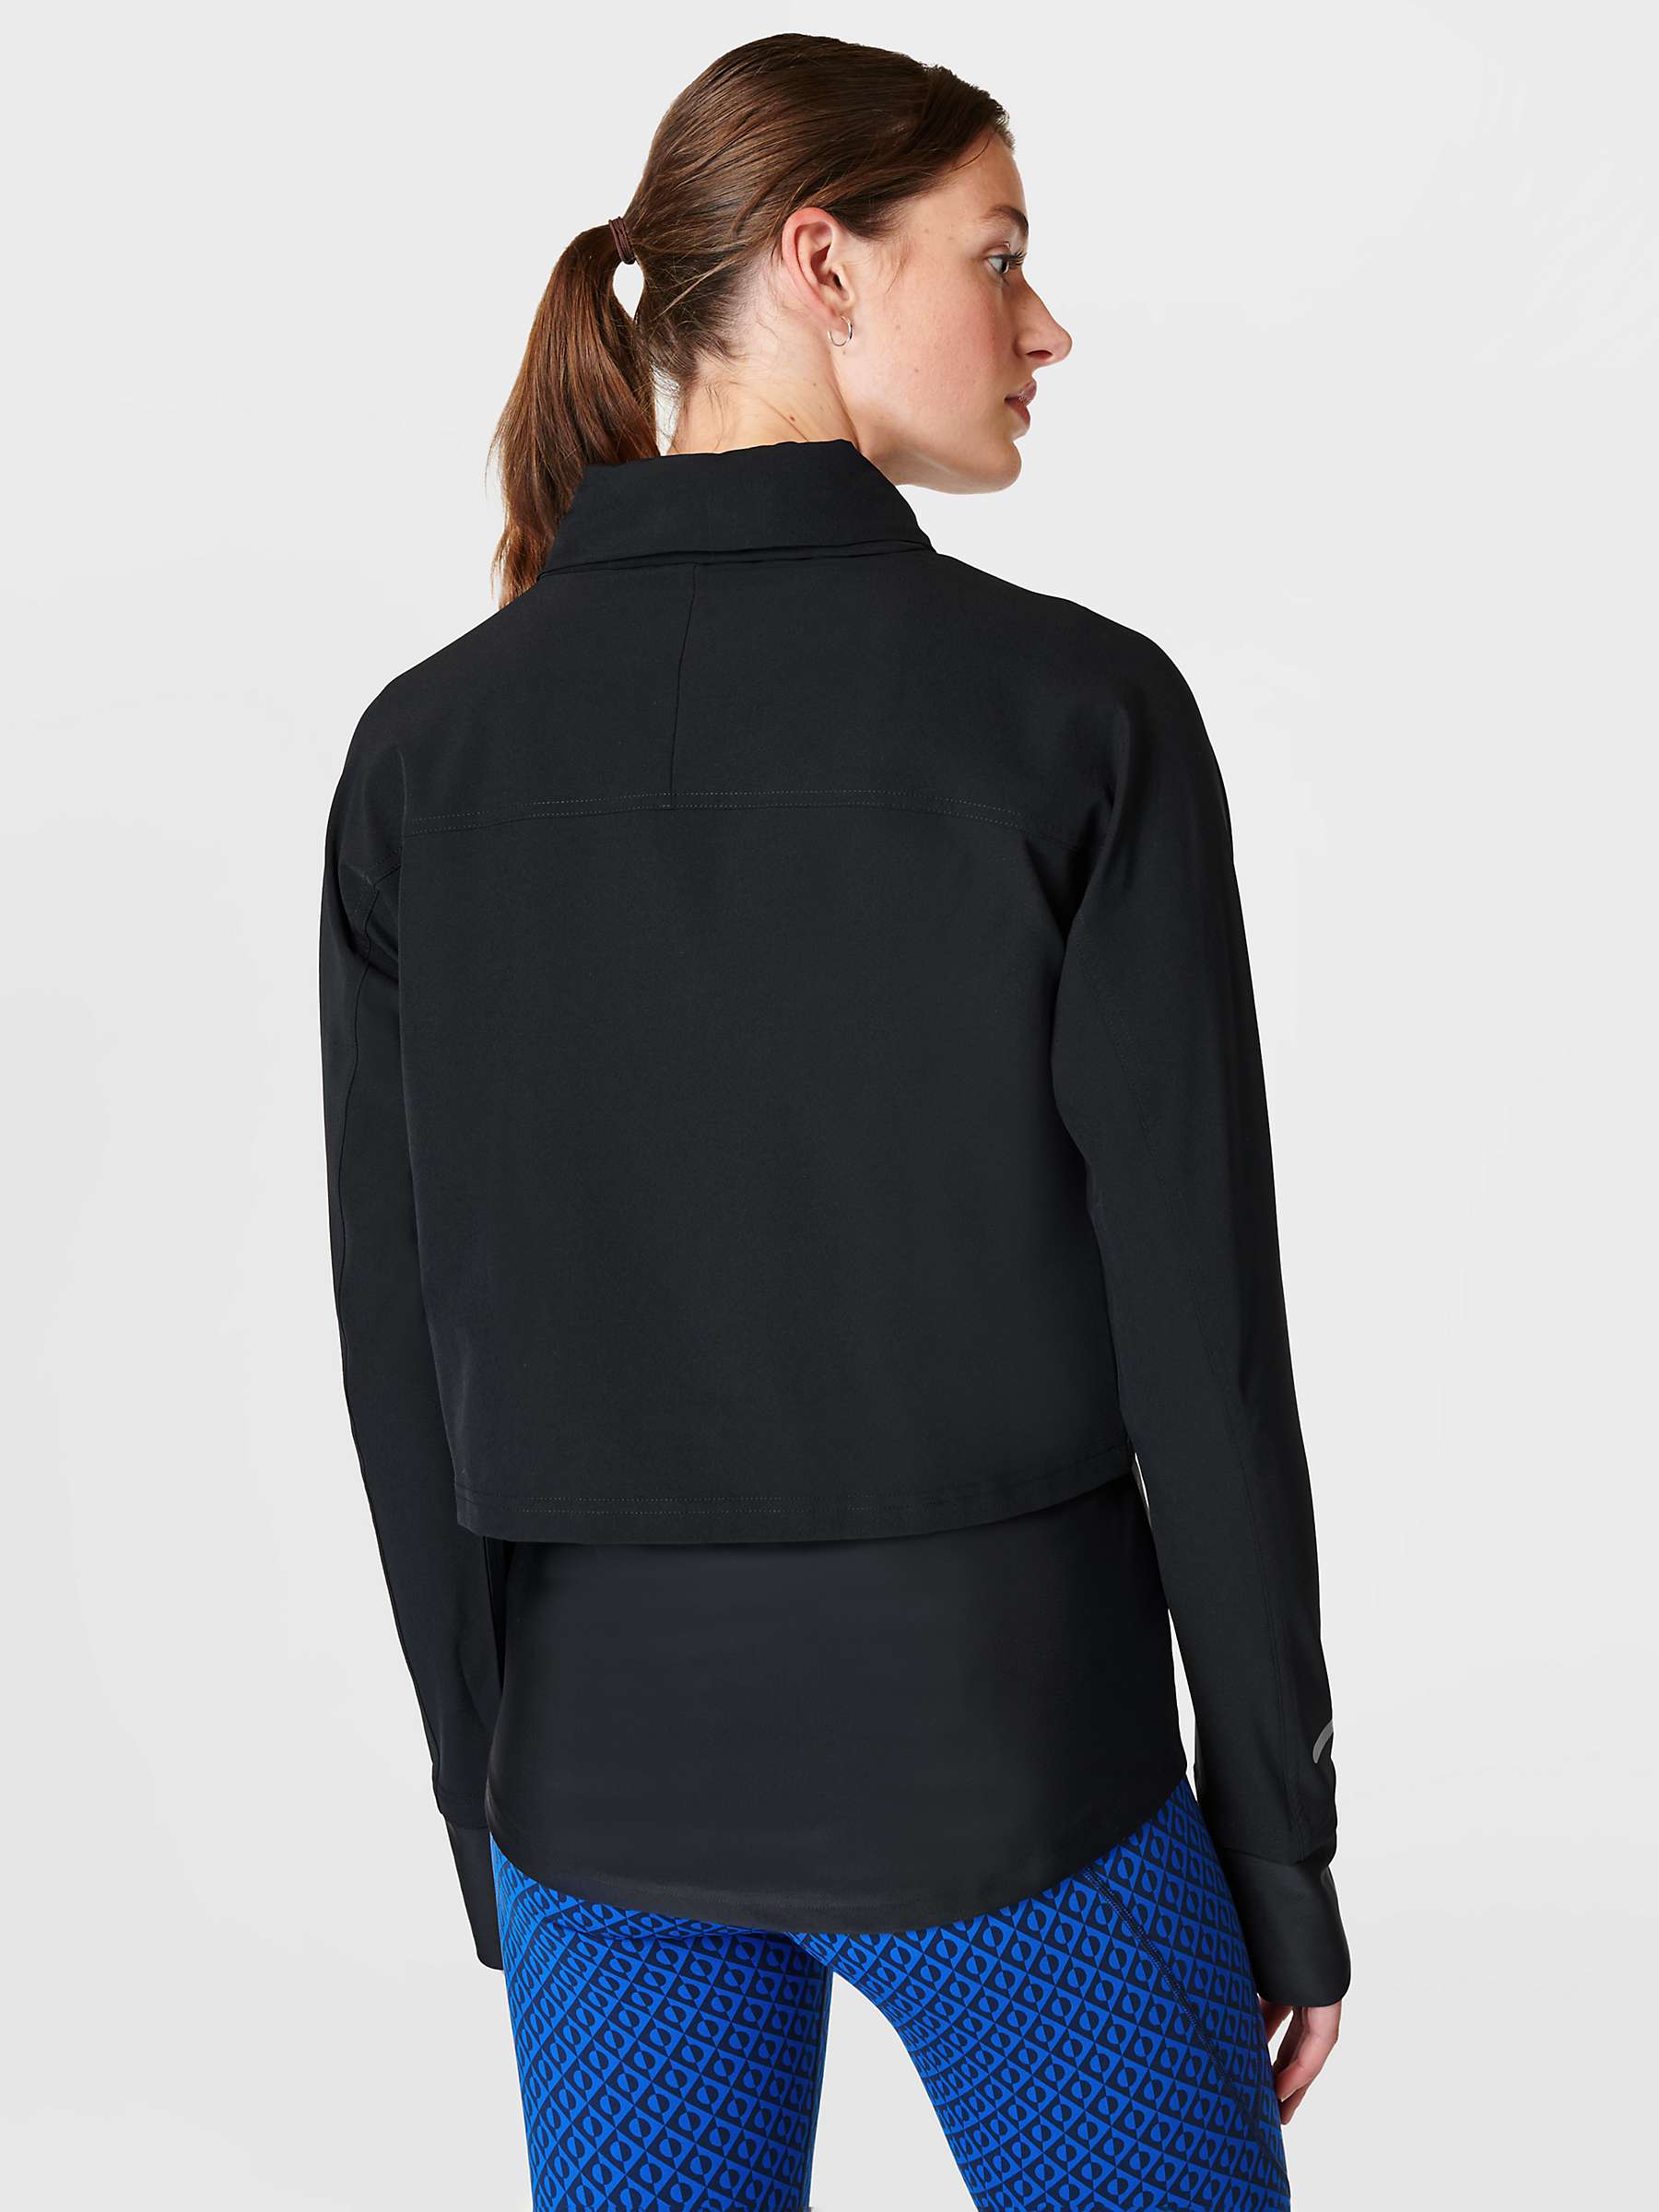 Buy Sweaty Betty Fast Track Running Jacket Online at johnlewis.com